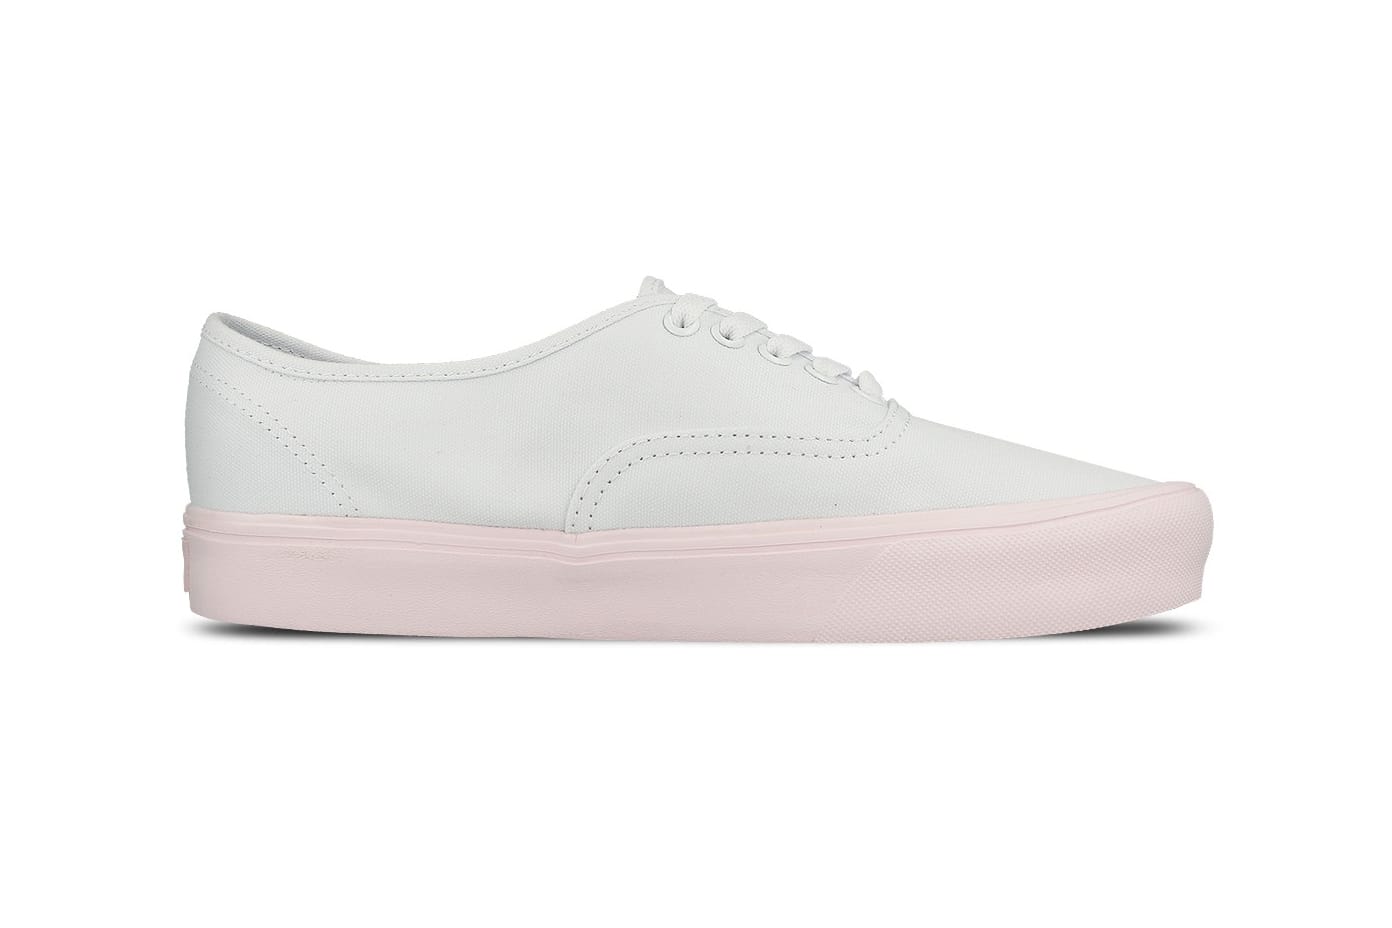 vans authentic lite sneakers with pink pop sole